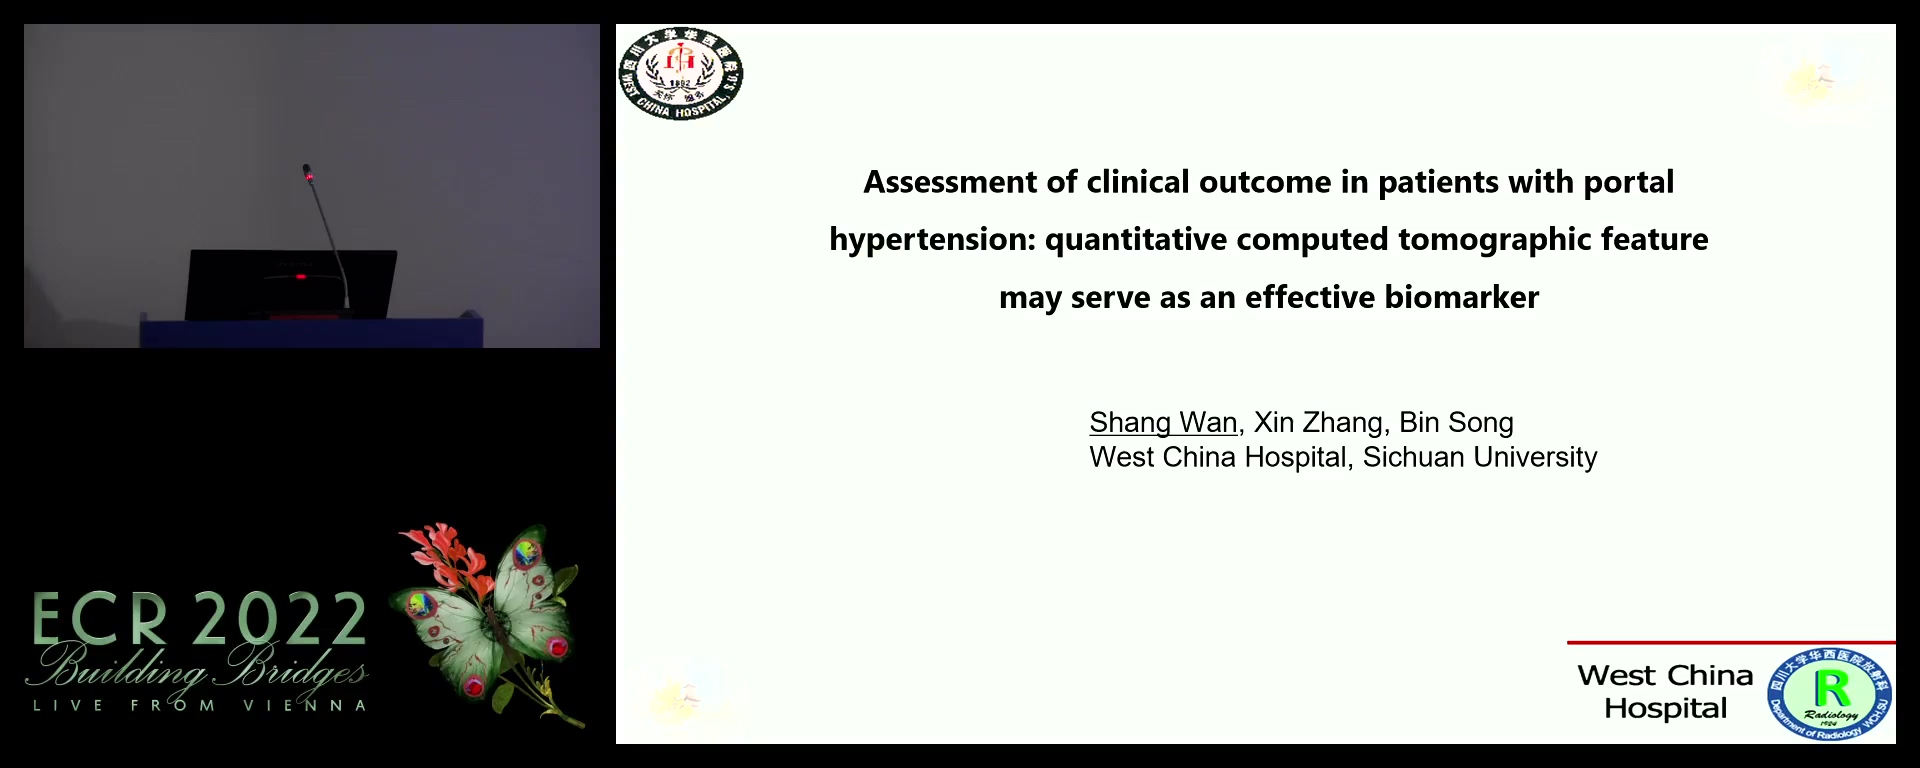 Assessment of clinical outcome in patients with portal hypertension: quantitative computed tomographic feature may serve as an effective biomarker - Shang Wan, Cheng DU / CN